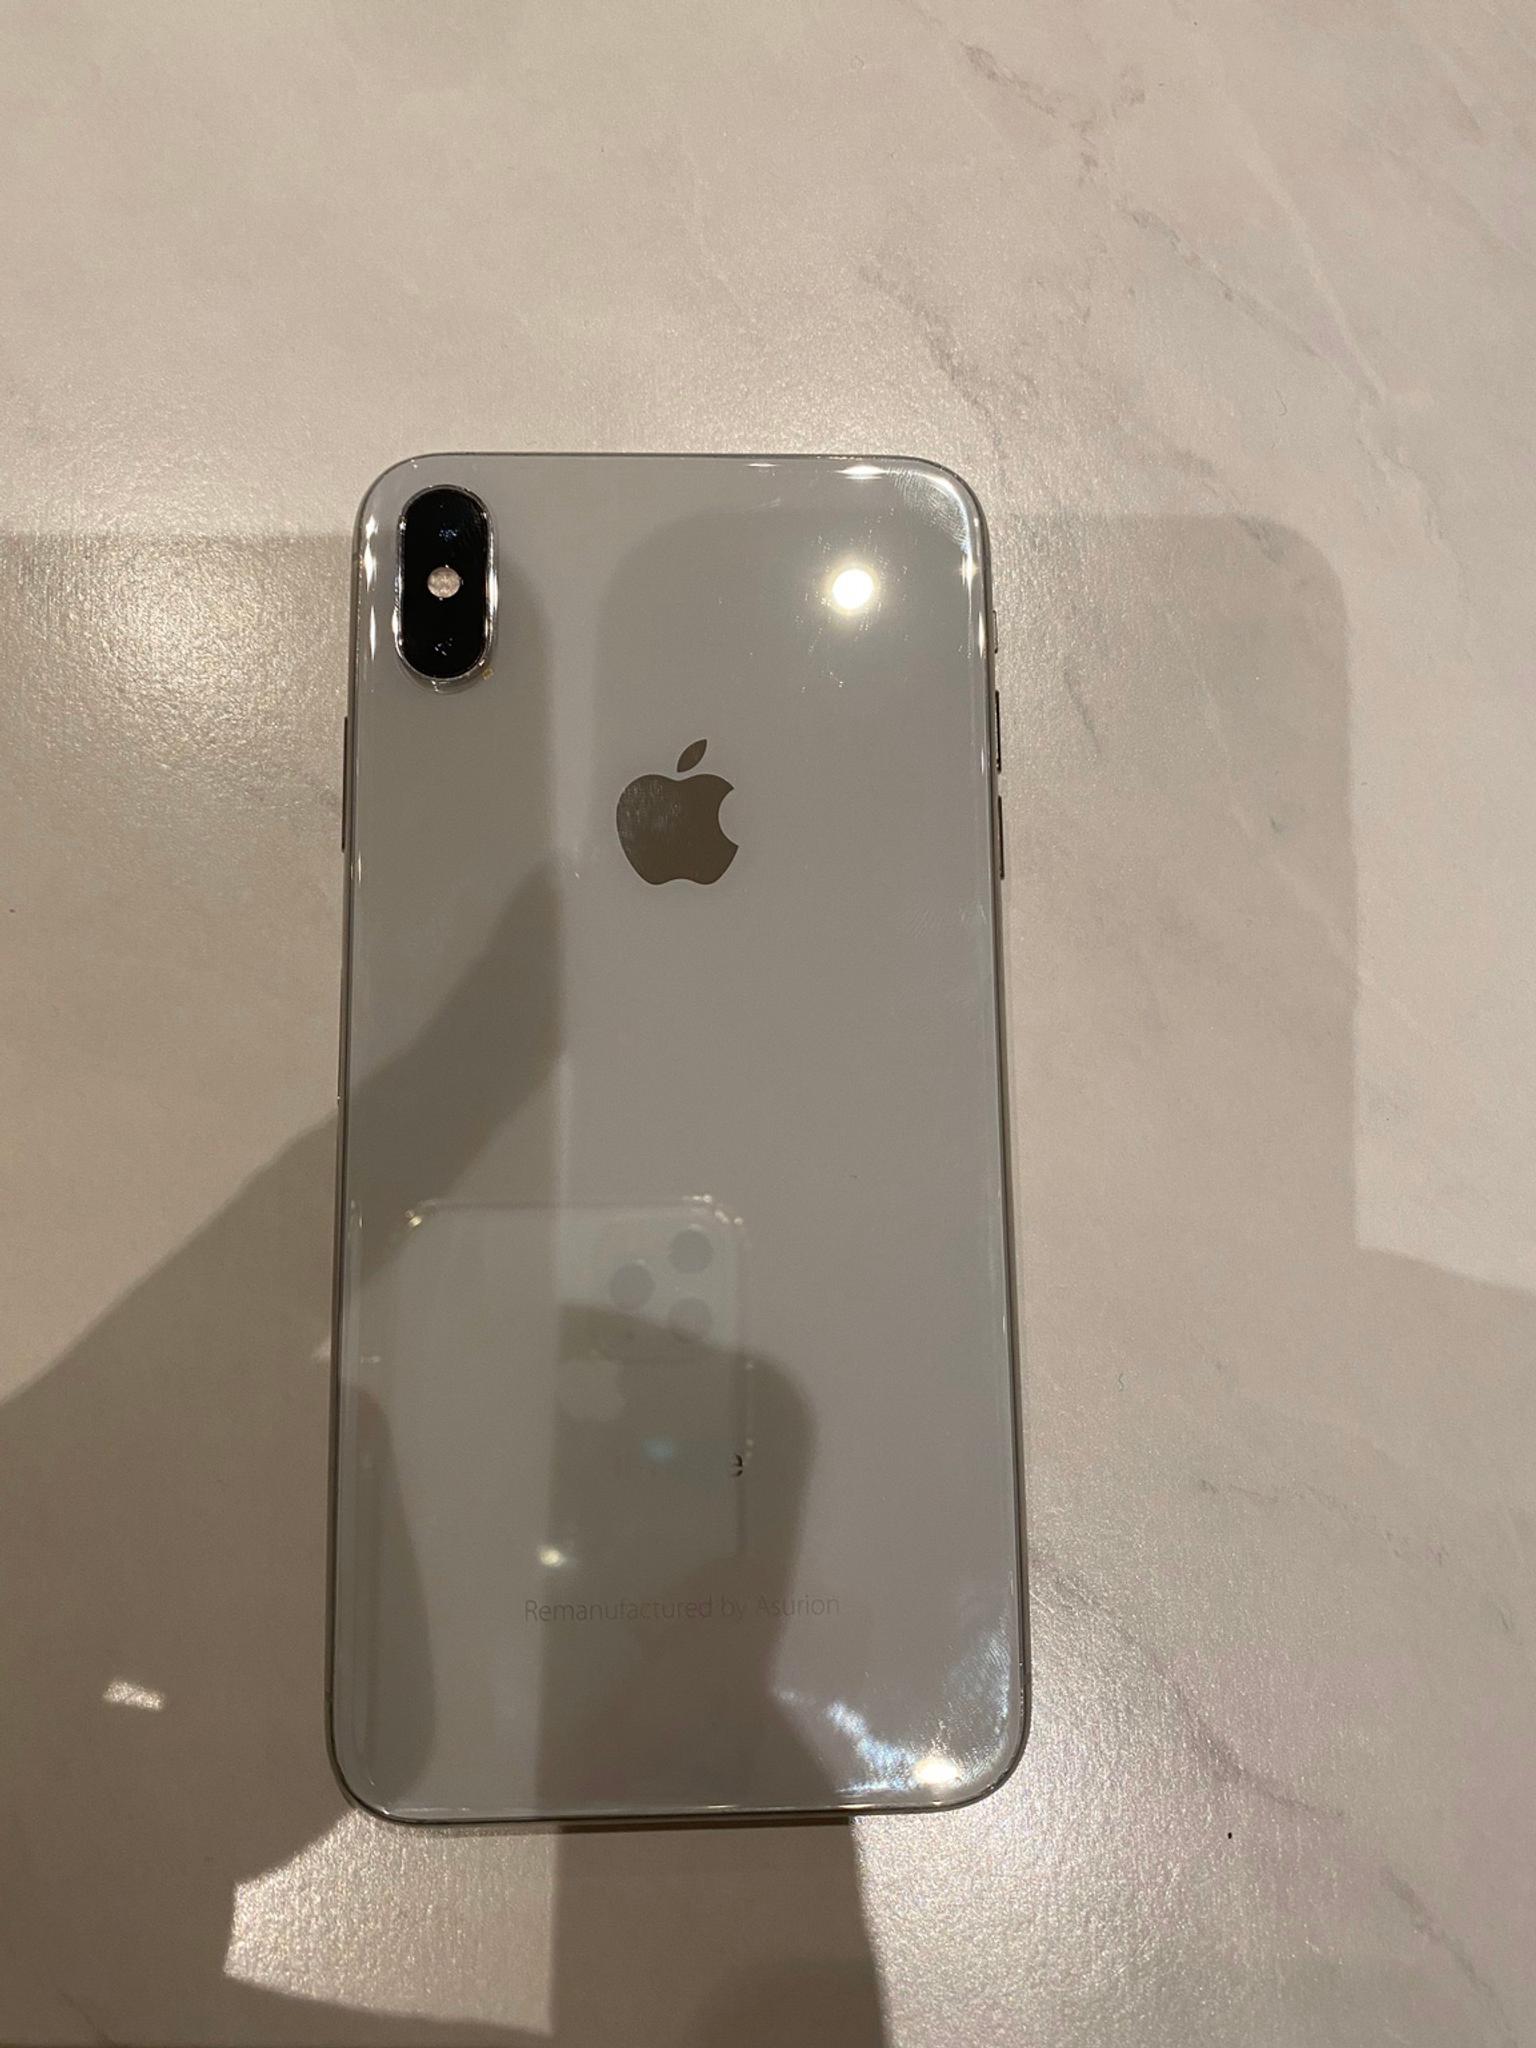 iPhone XS Max 256gb space grey in SE1 London for £758.00 for sale | Shpock